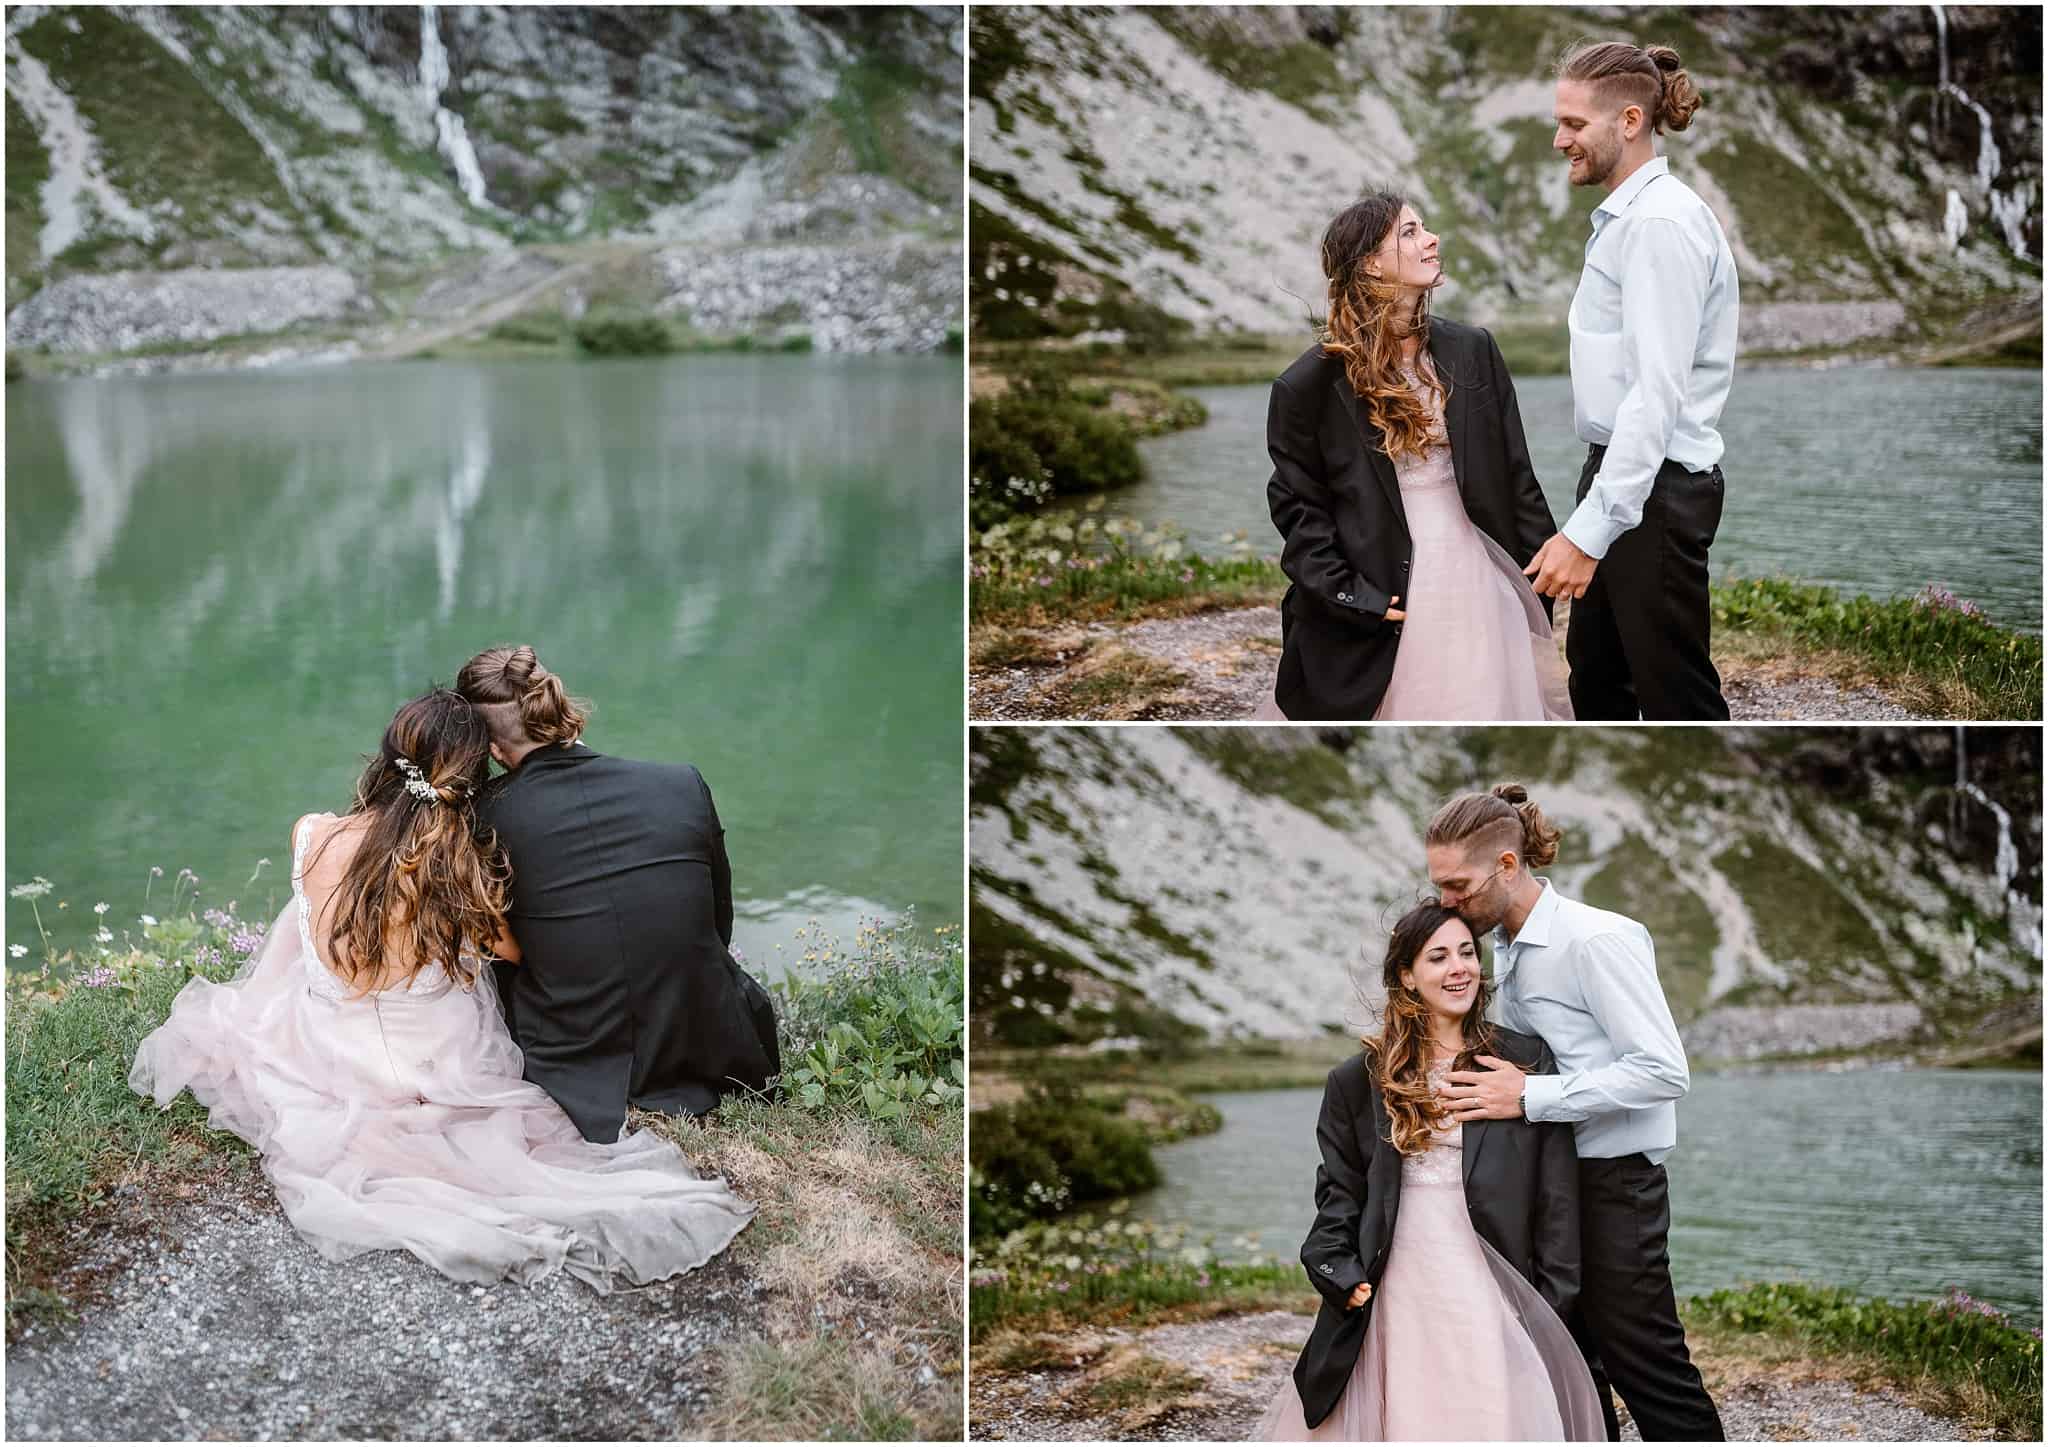 couple having a destination wedding in Italy by an alpine lake in Piedmont